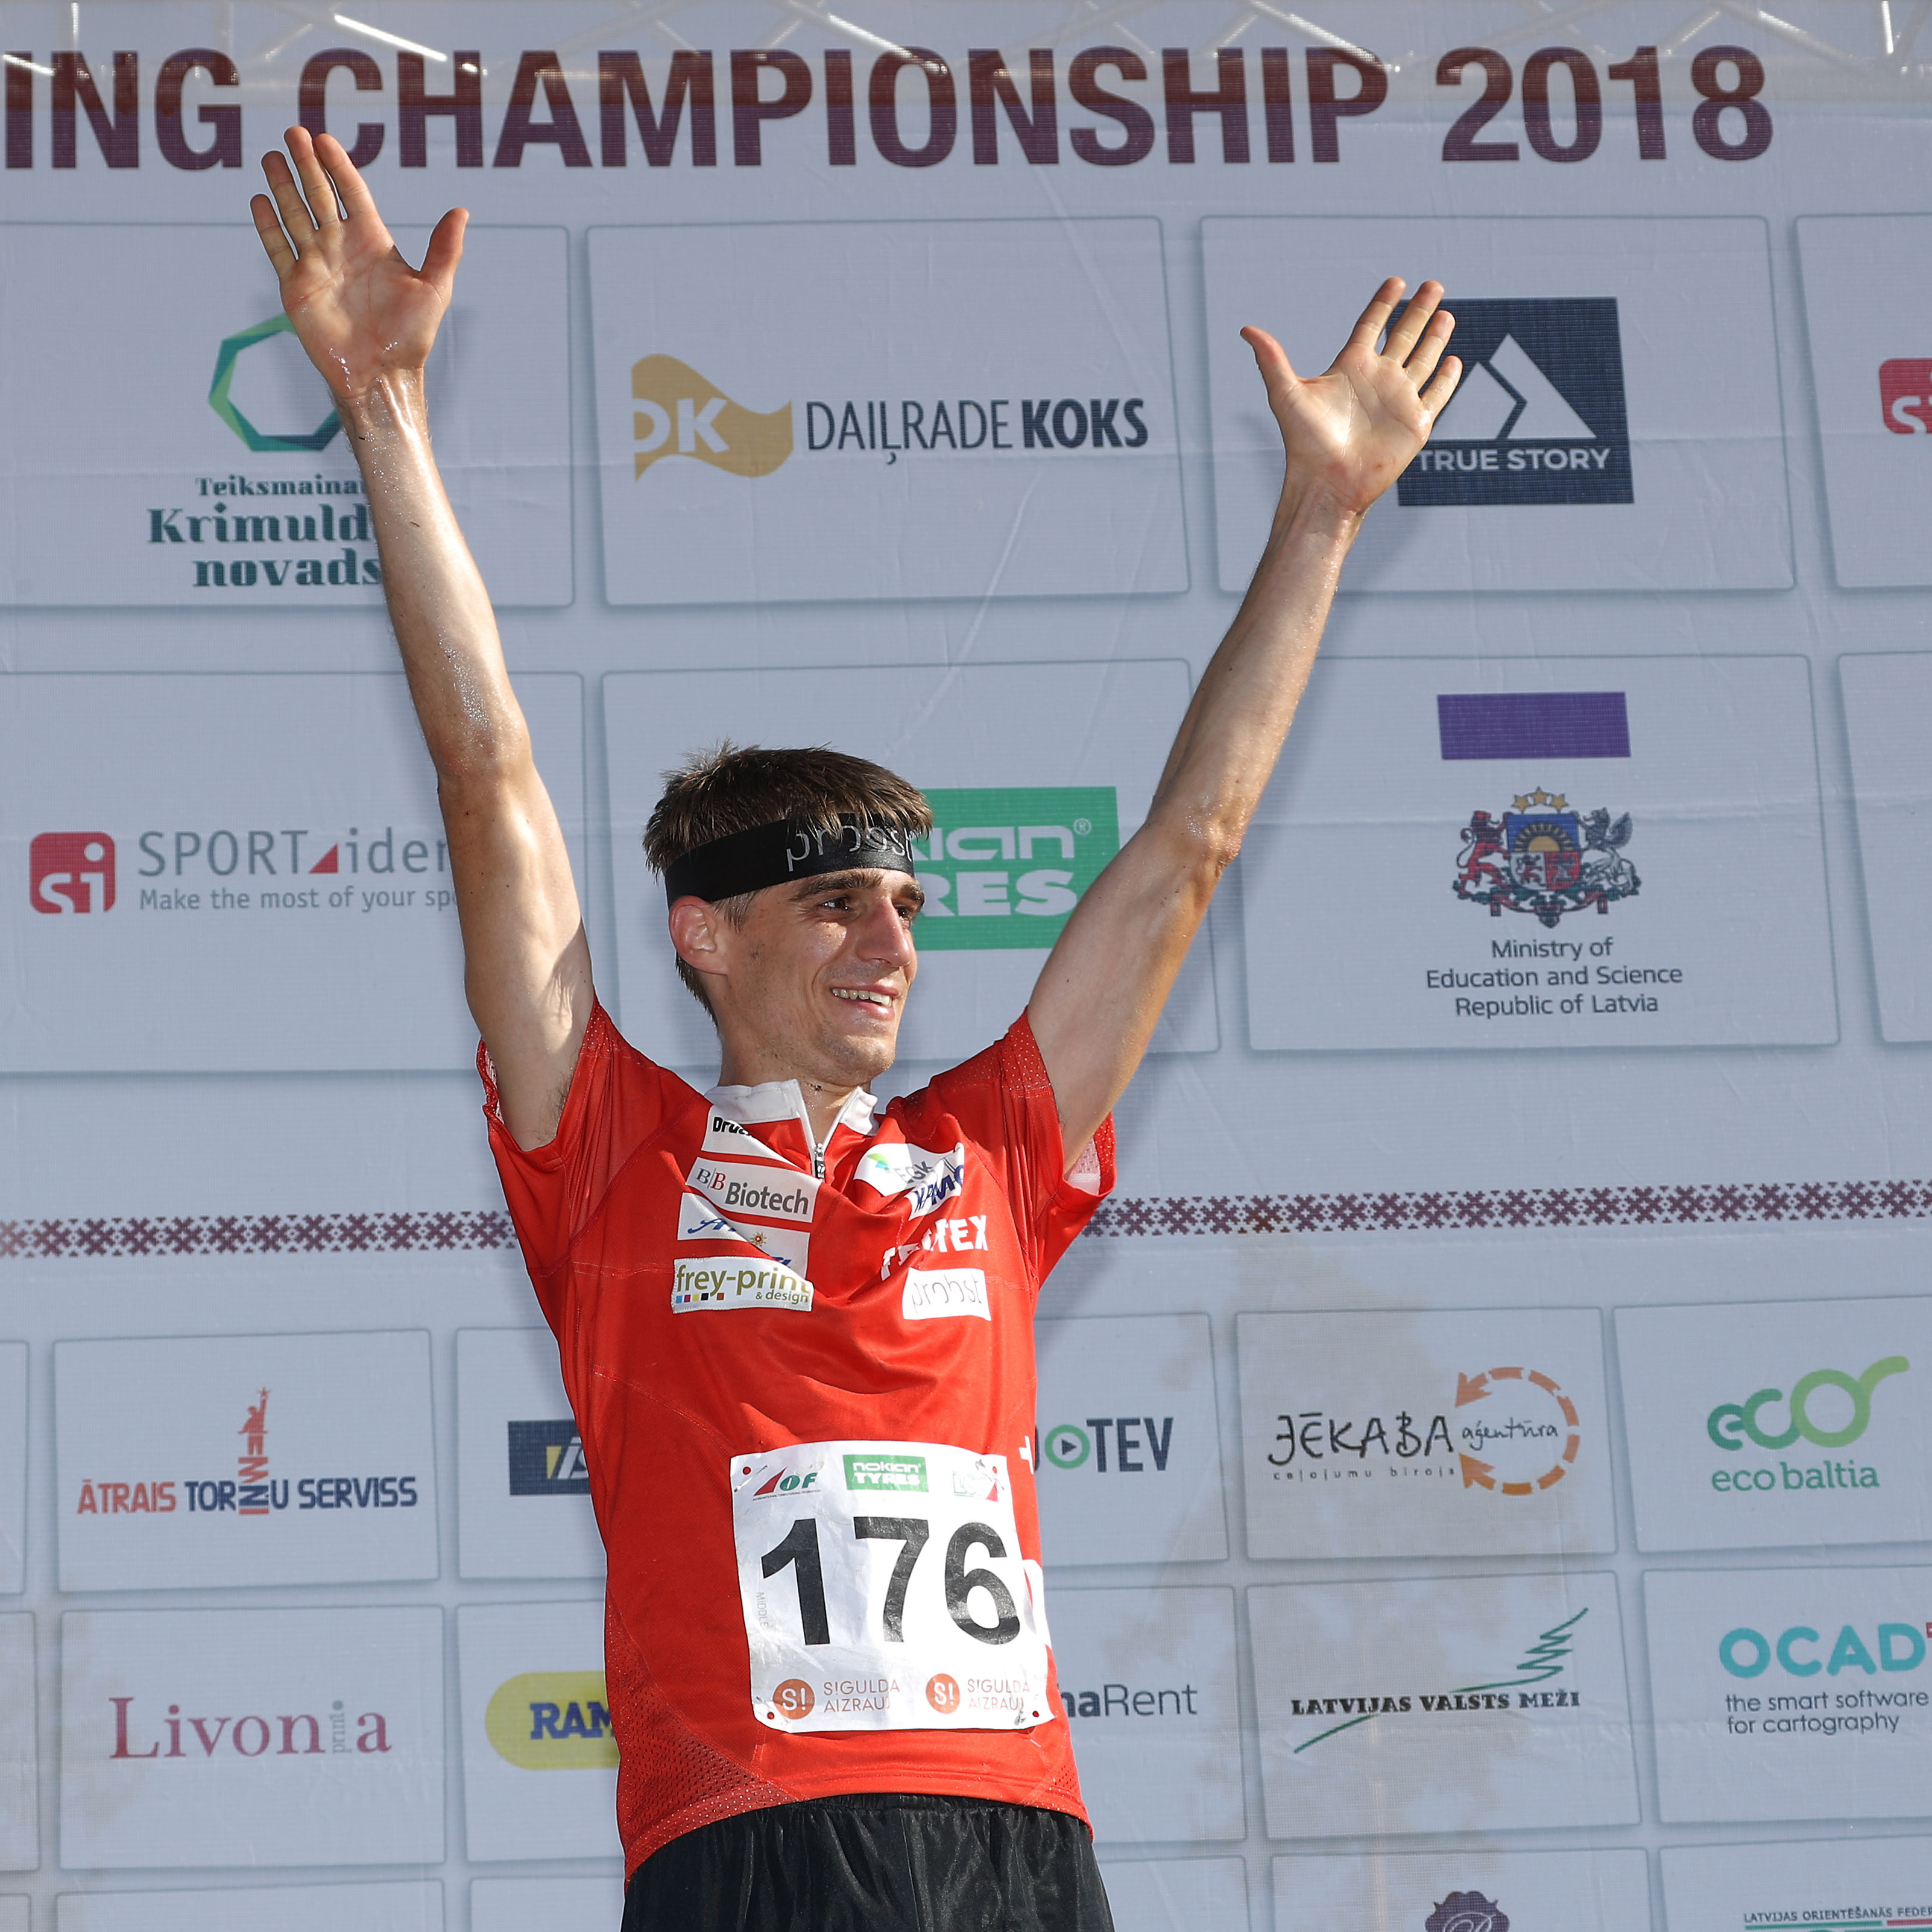 SIGULDA/LATVIA, 07.08.2018 - Florian Howald (SUI, 3rd) captured during the Middle Distance at the World Orienteering Championships WOC 2018 in Sigulda (Latvia). copyright by www.steineggerpix.com + Swiss Orienteering / photo by remy steinegger#woc2018 #swissorienteering #orienteering #steineggerpix.com